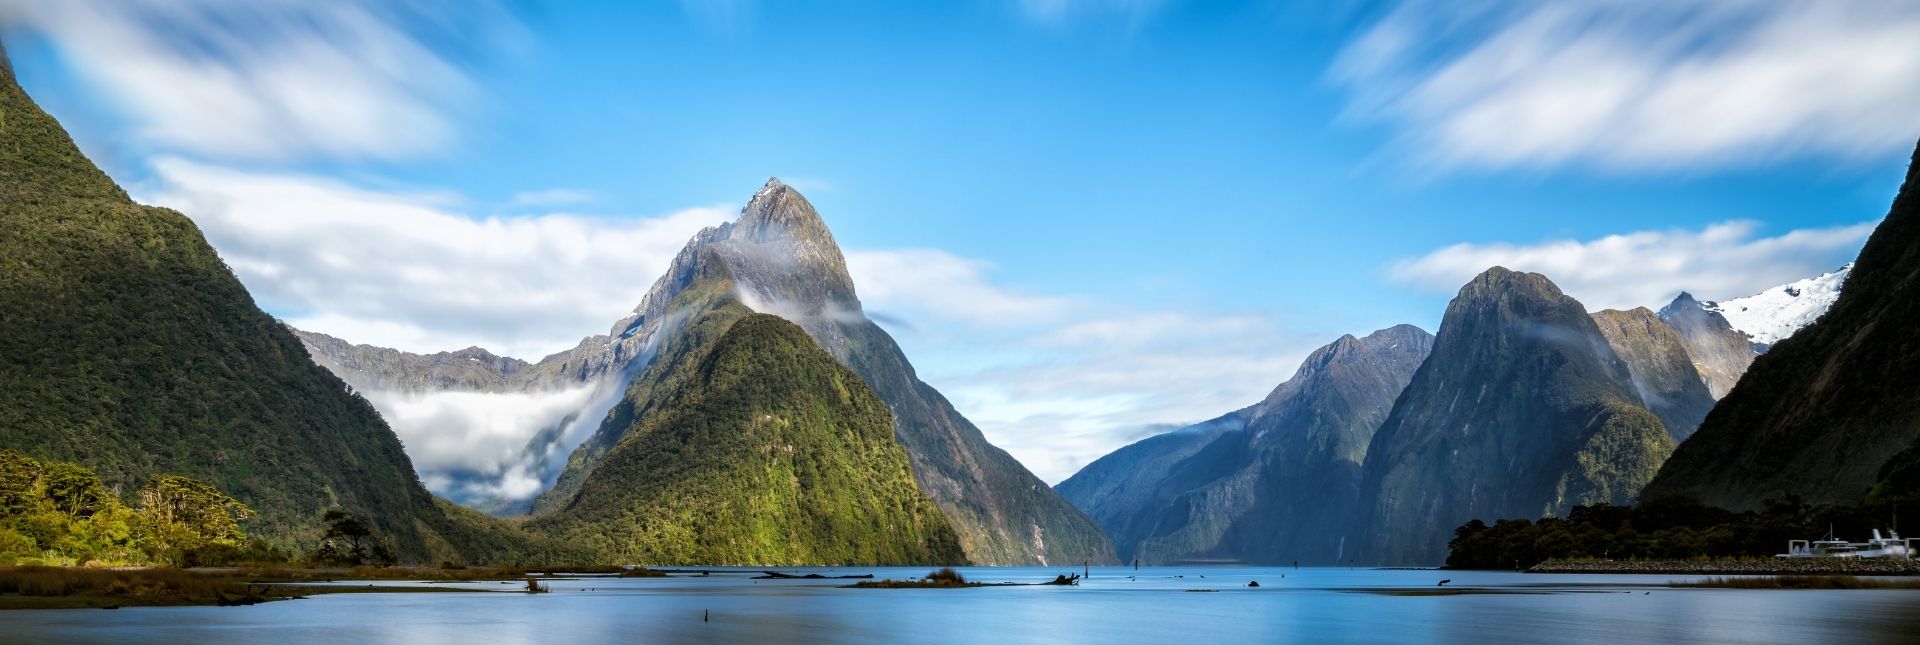 Mitre Peak is the iconic landmark of Milford Sound in Fiordland National Park, South Island of New Zealand